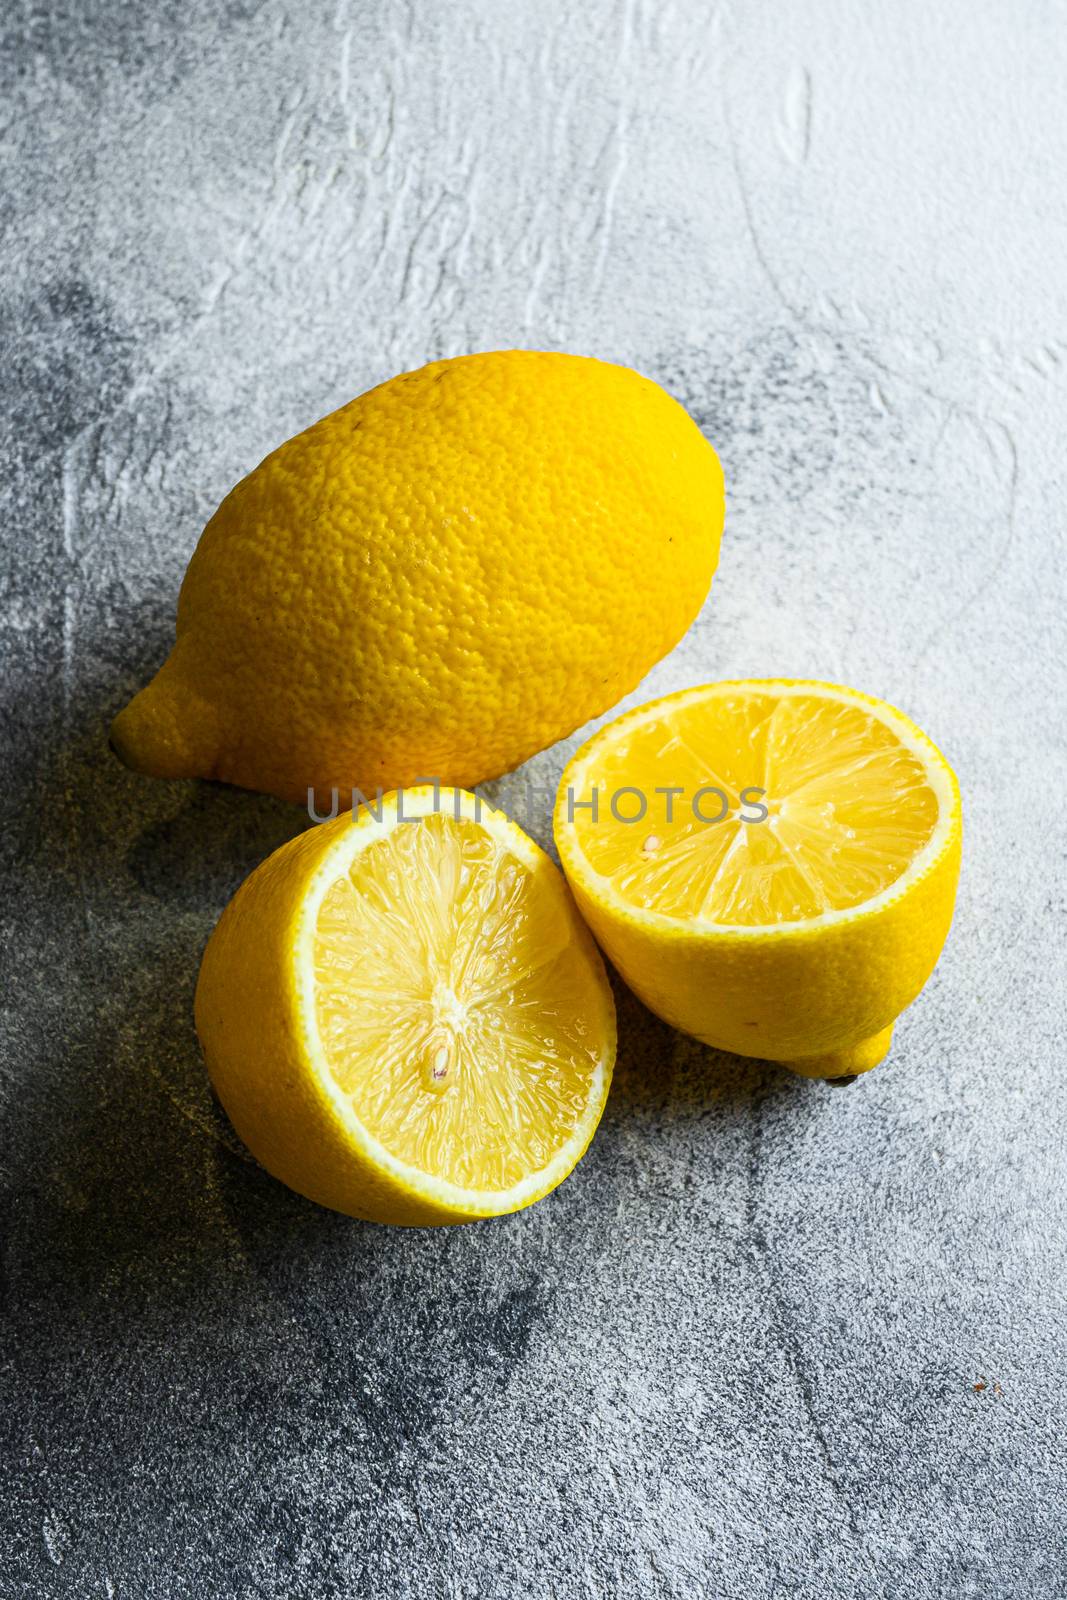 Delicious sliced citrus fruit Whole yellow lemon and lemon cut half, top view, copy space. Fresh citrus fruits, vitamin c source on grey background by Ilianesolenyi